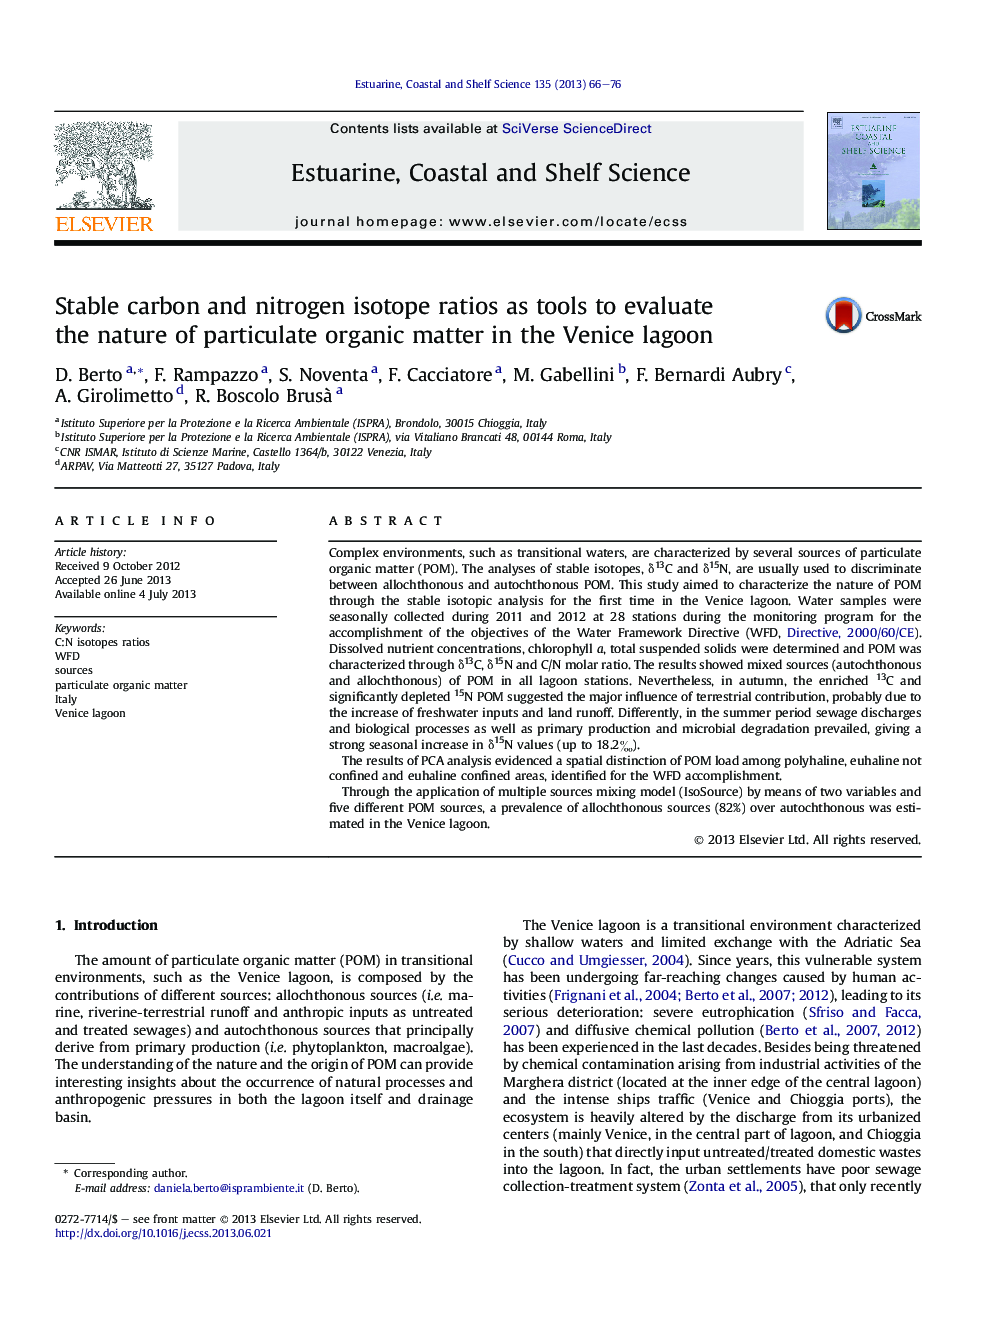 Stable carbon and nitrogen isotope ratios as tools to evaluate the nature of particulate organic matter in the Venice lagoon